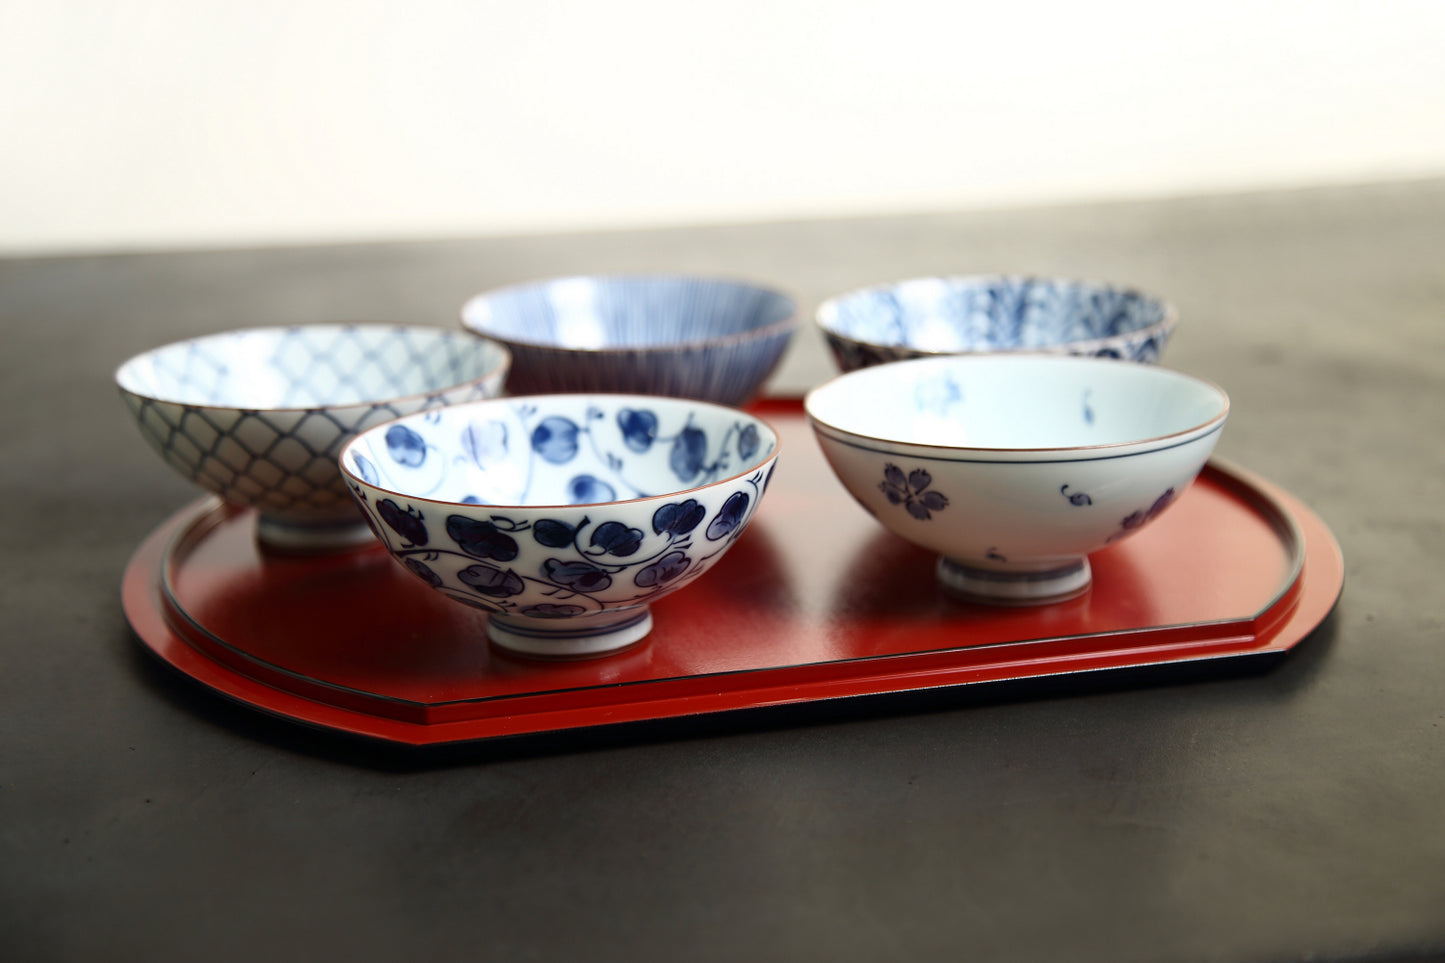 Japanese Pottery Set – Traditional Japanese Rice Bowls – Blue and White Asian Bowls – Hand Painted Bowls – Premium Japanese Ceramic – 5 pieces Japanese Soup Bowl Set